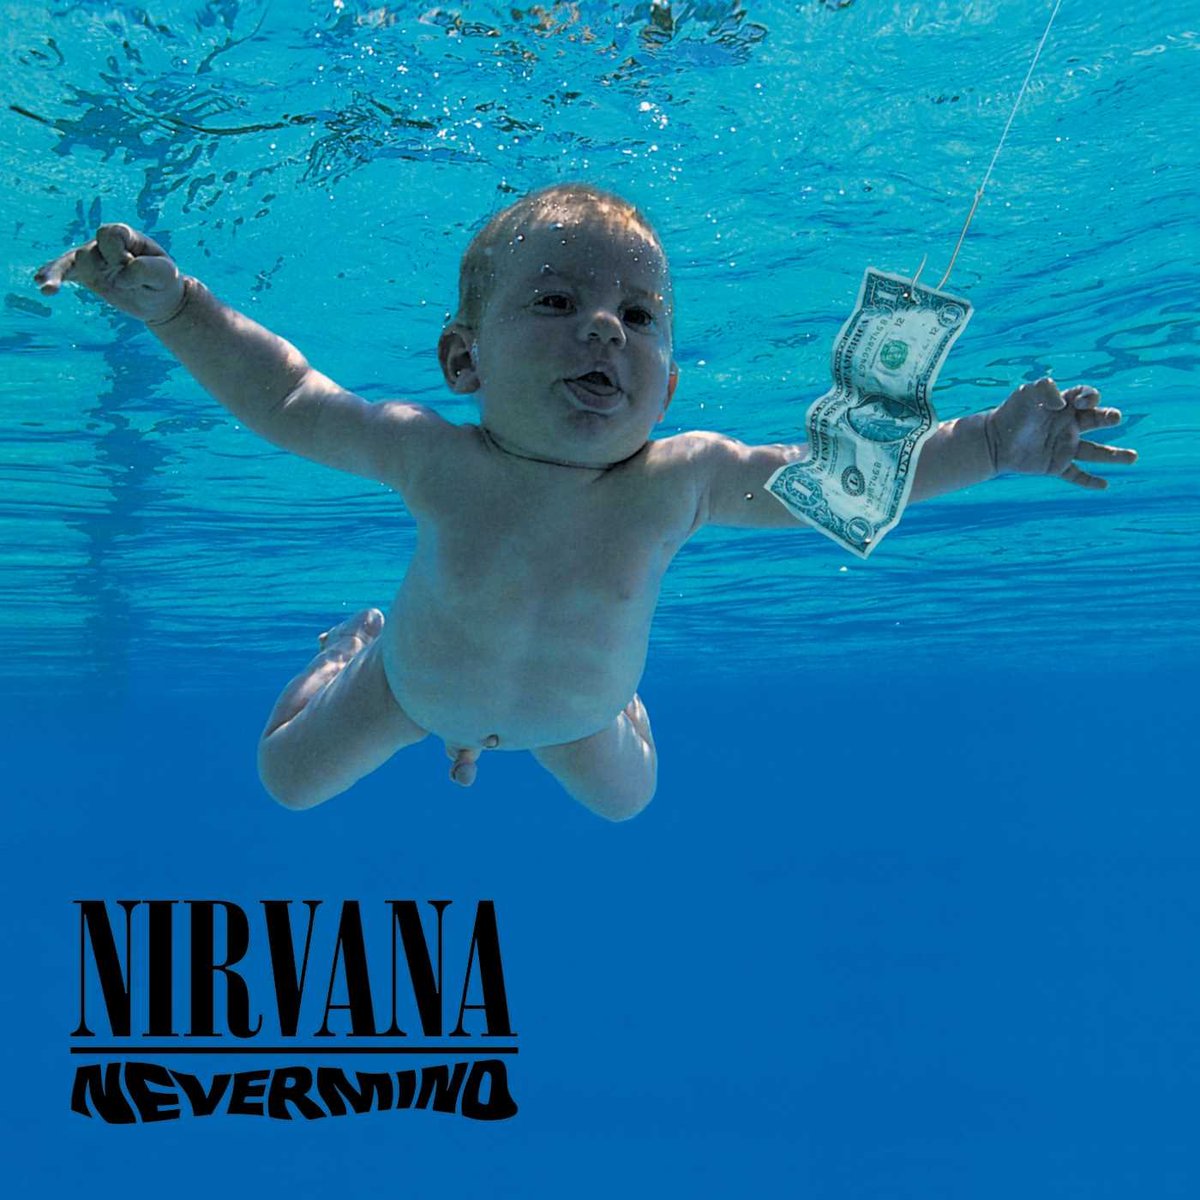 September 24, 1991 – Nirvana released their second album NEVERMIND and changed music forever